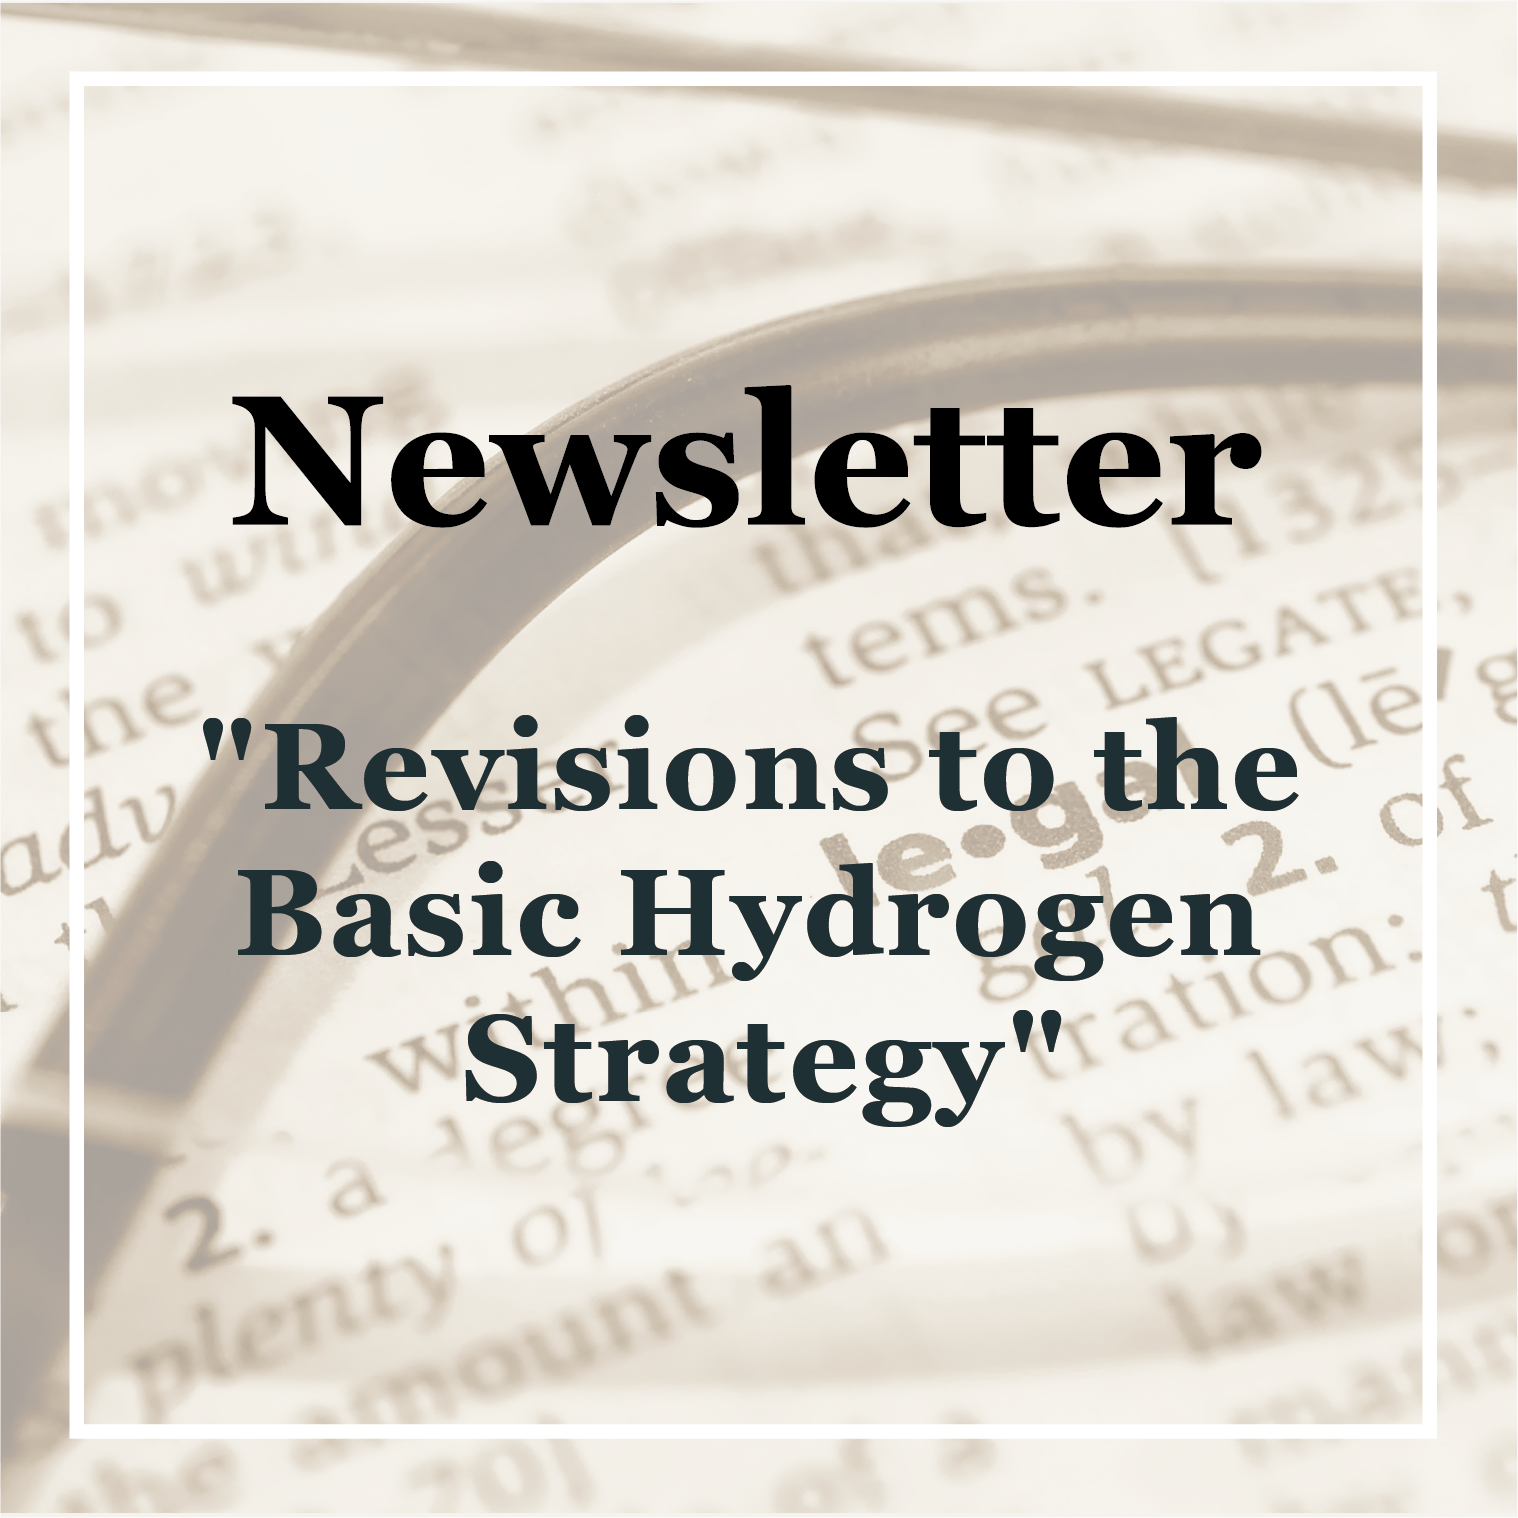 "Revisions to the Basic Hydrogen Strategy": Projects & Energy Practice Team